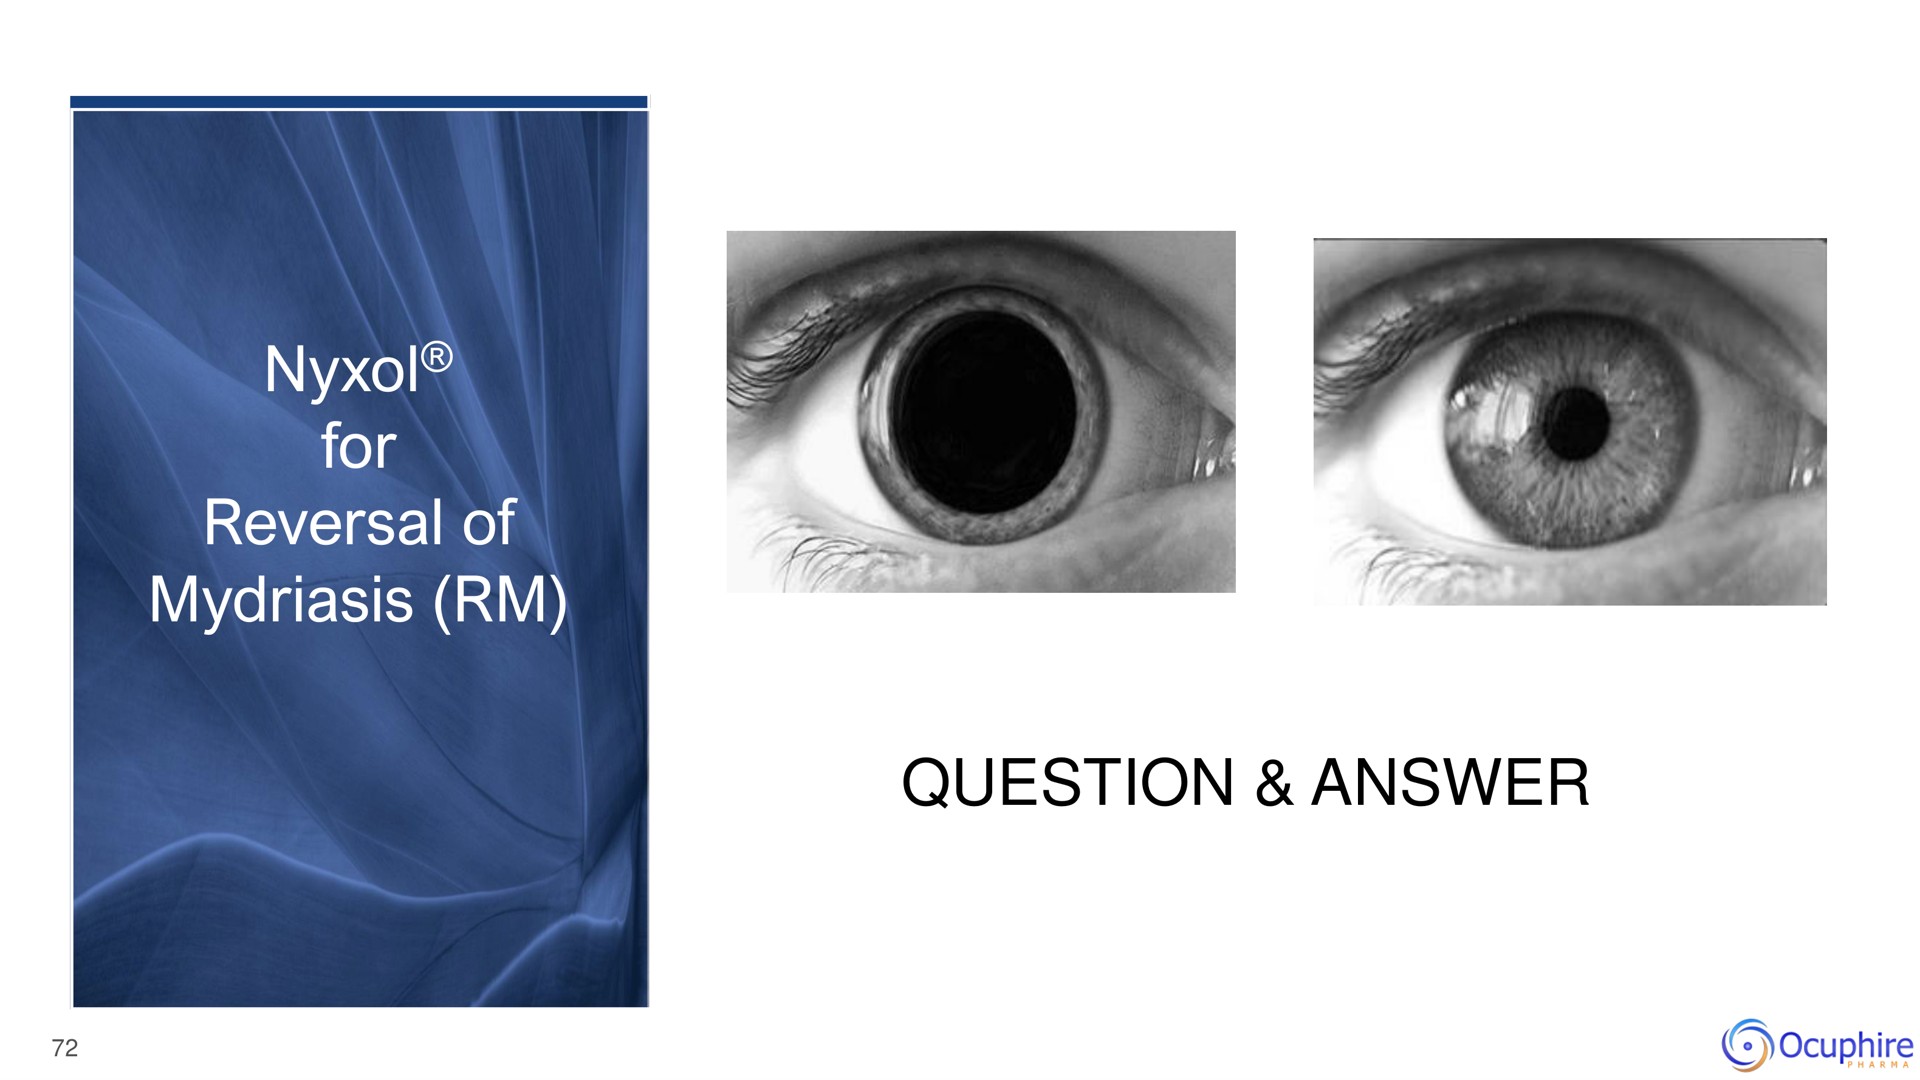 for reversal of mydriasis question answer axe | Ocuphire Pharma